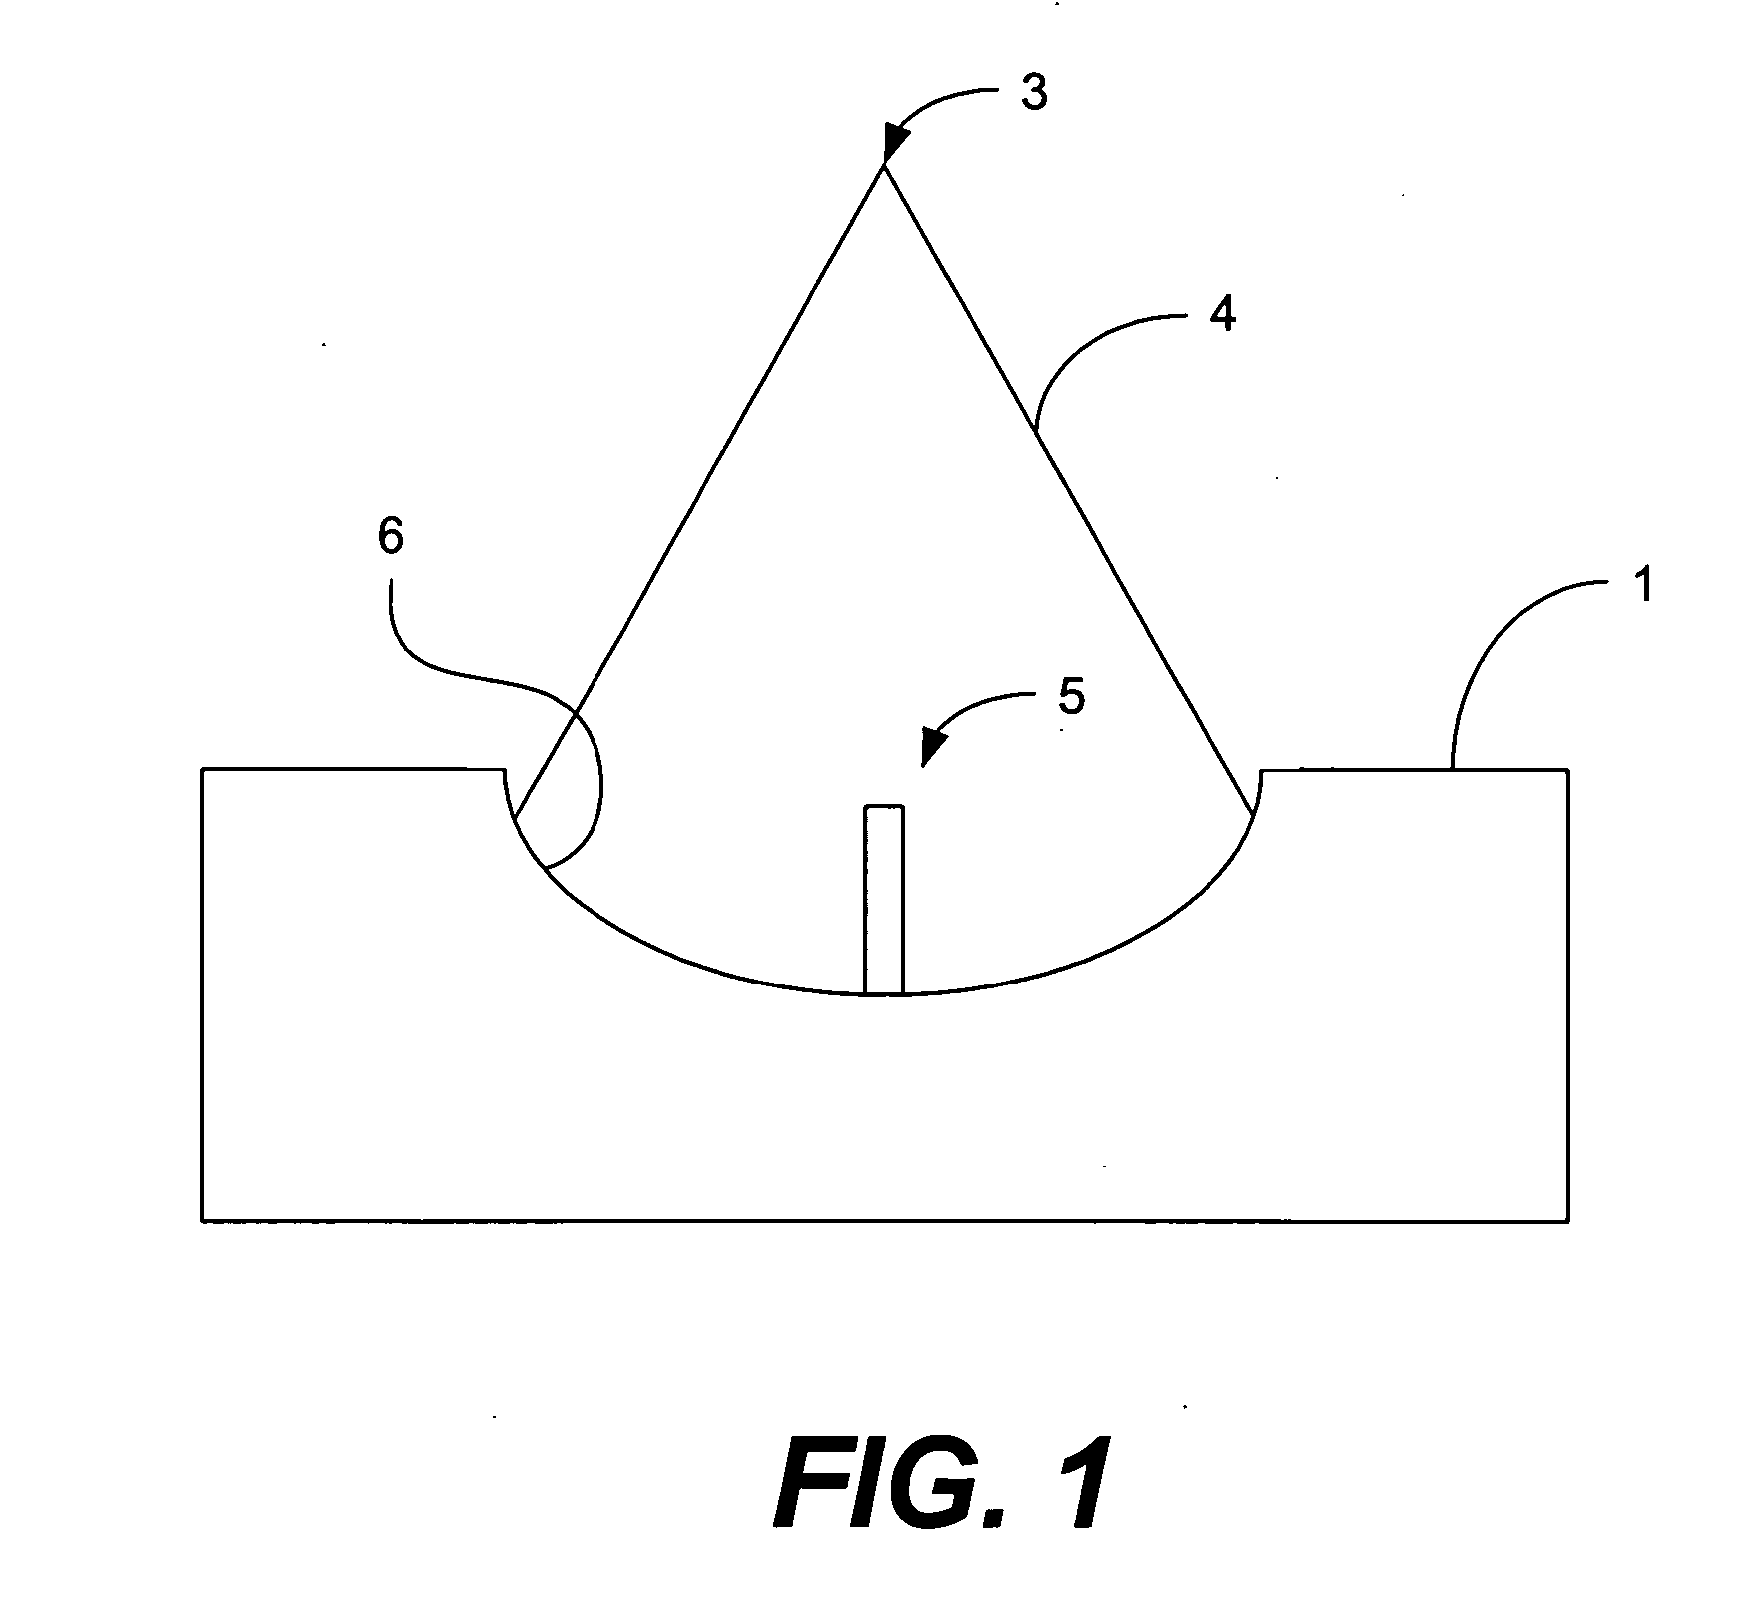 Method for use in orthodontics for treating patients with malocclusion